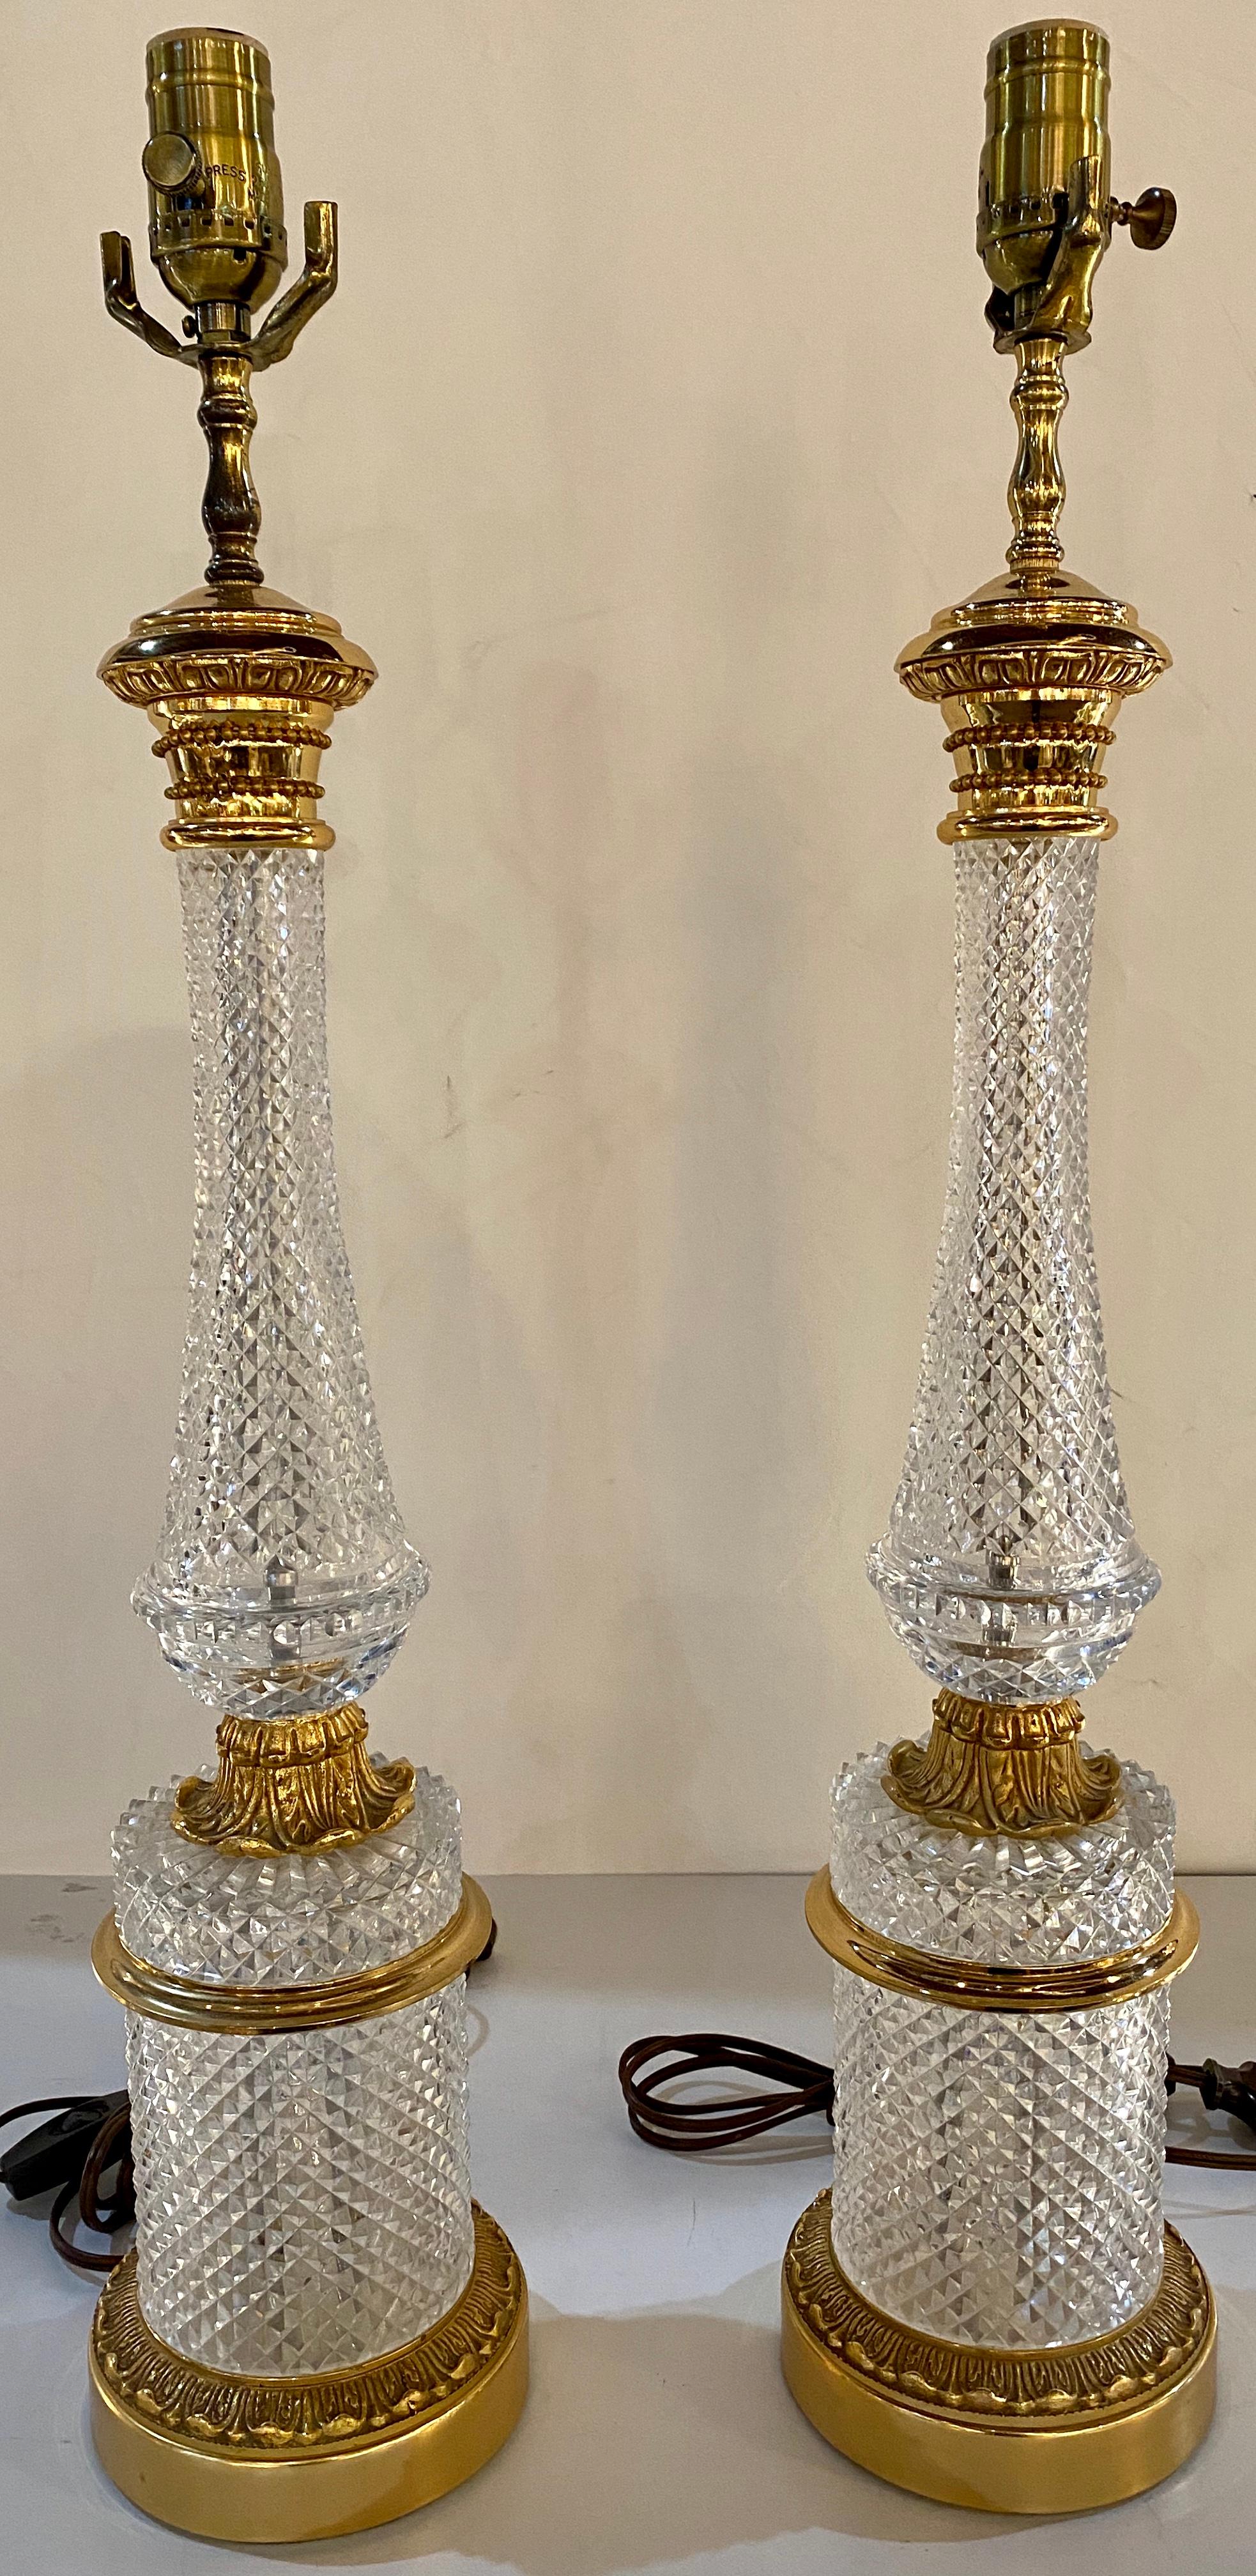 Pair of finely cut glass table lamps with bronze mounting Baccarat style. These column-form lamps do not have harps or shades.
SXA.